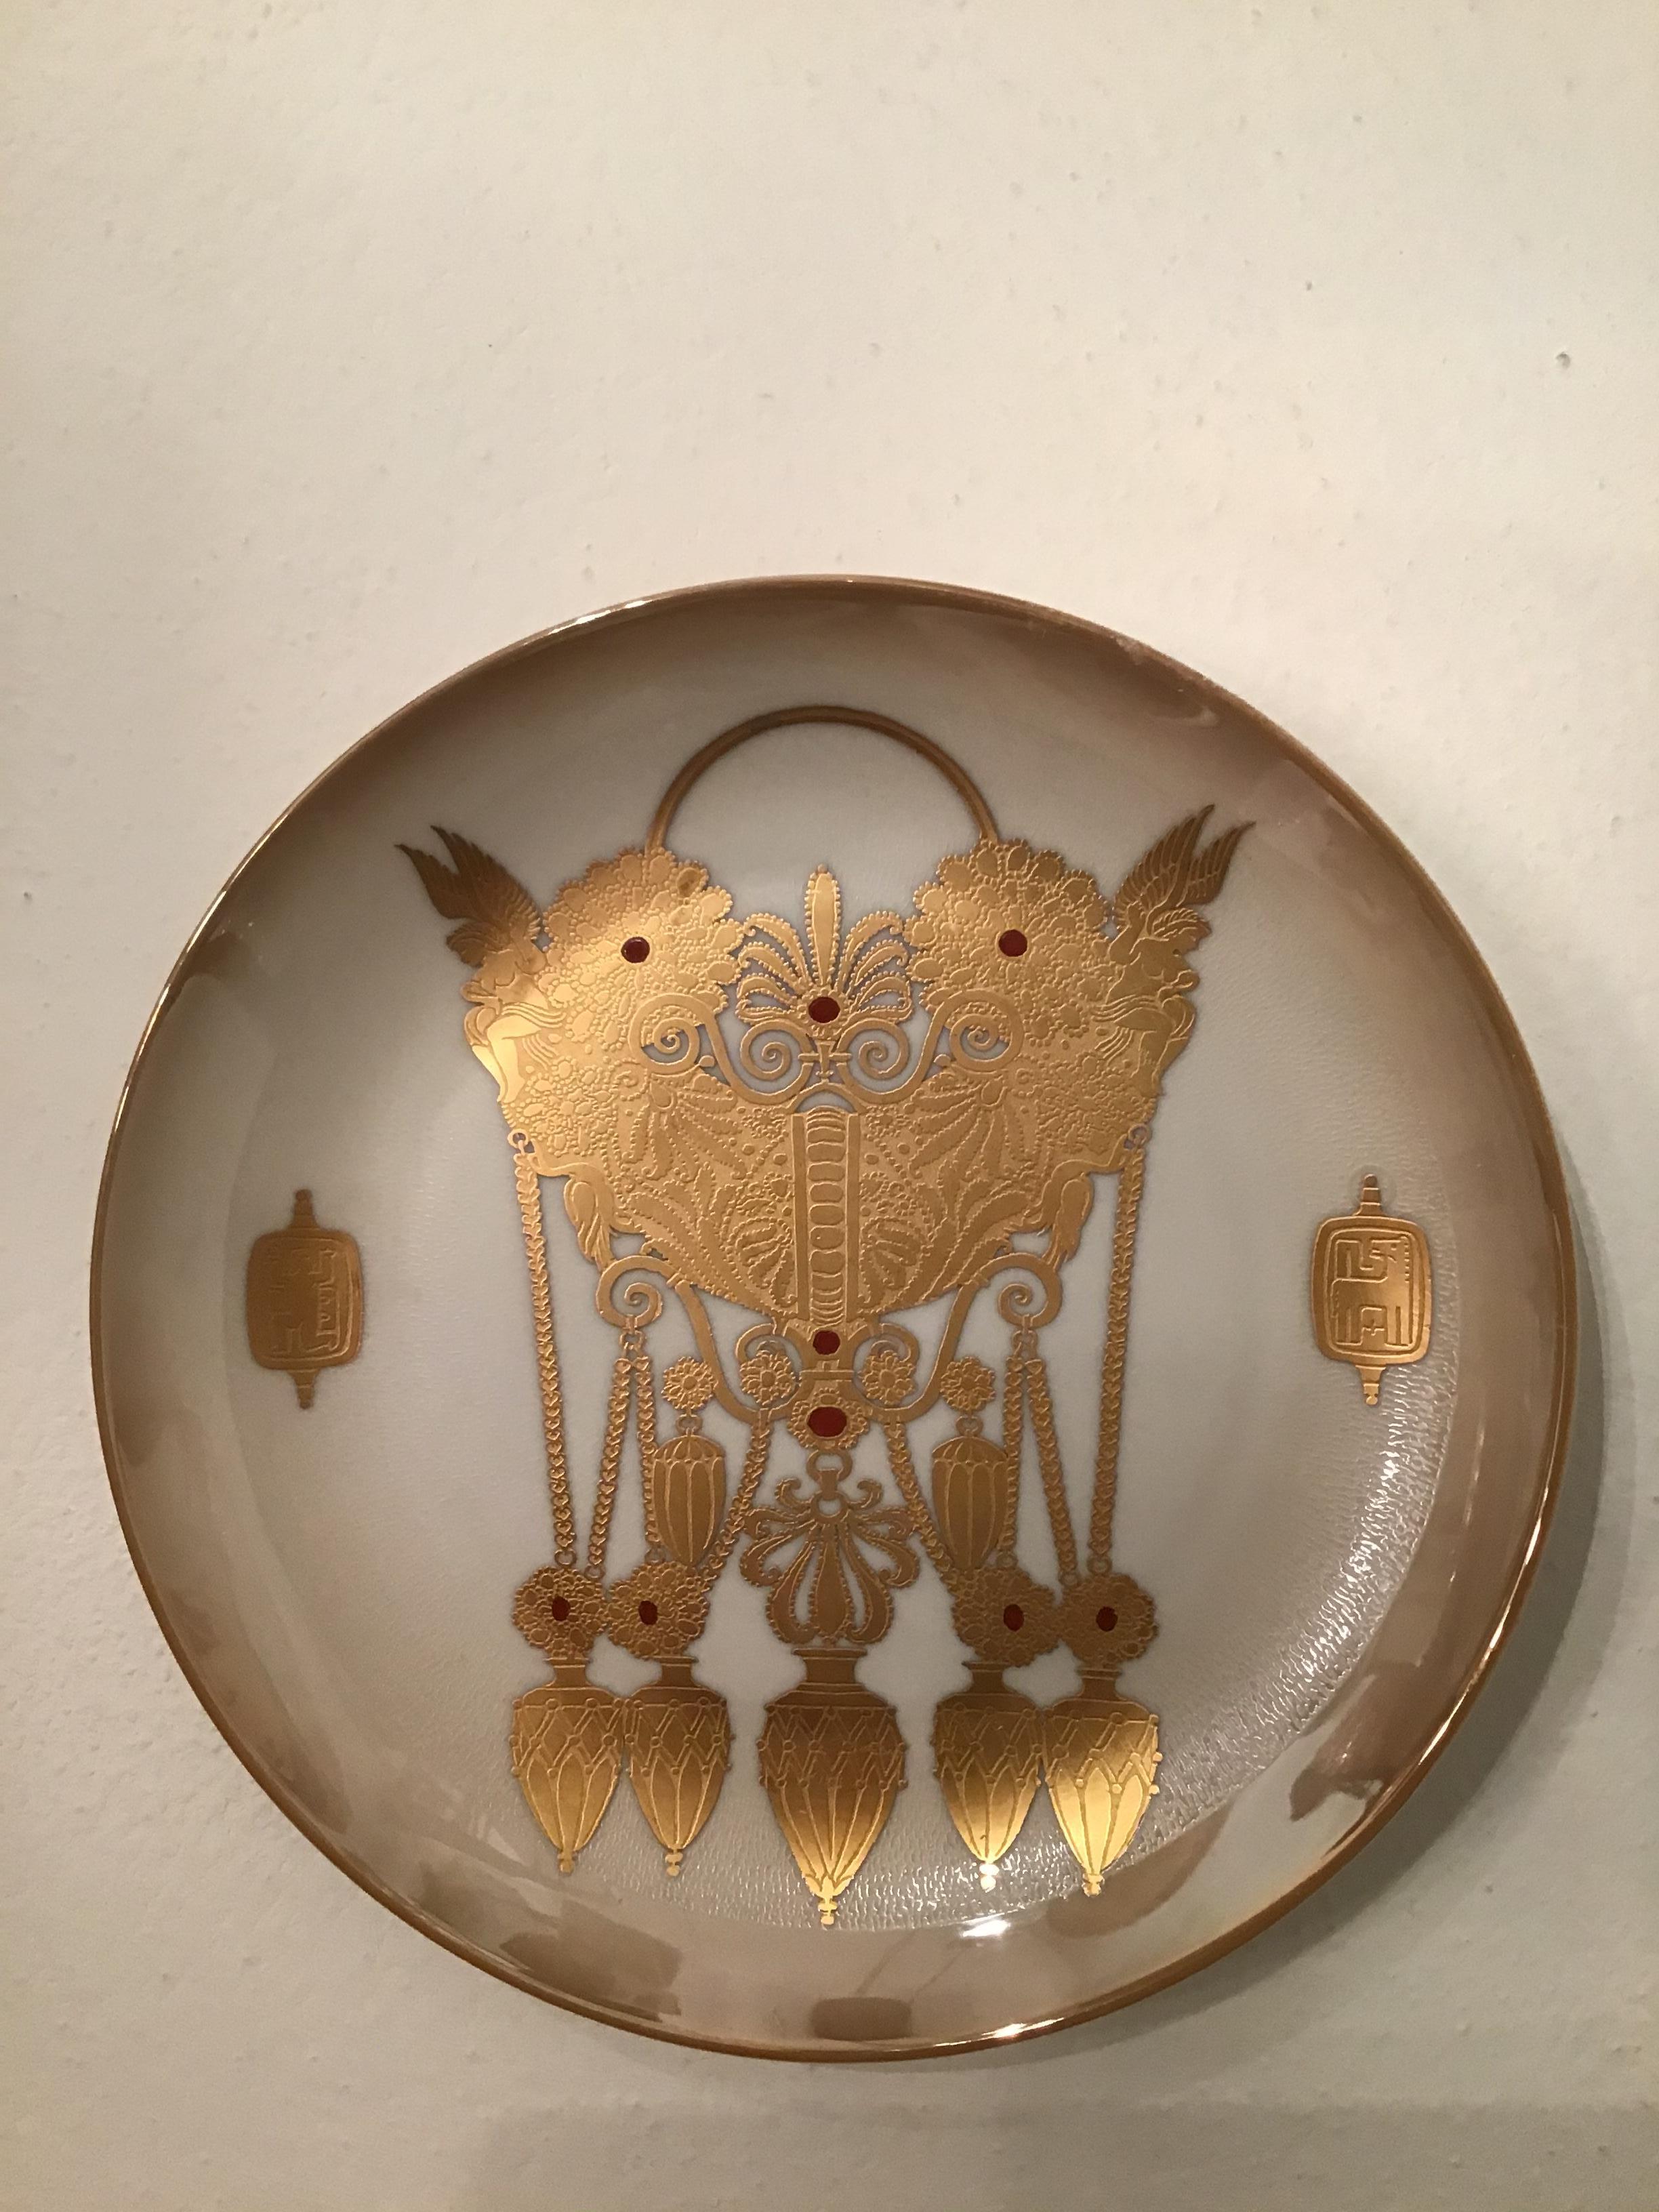 Morbelli Porcelain Wall Plate “Gioielli Italici”, 1987 Italy  For Sale 1